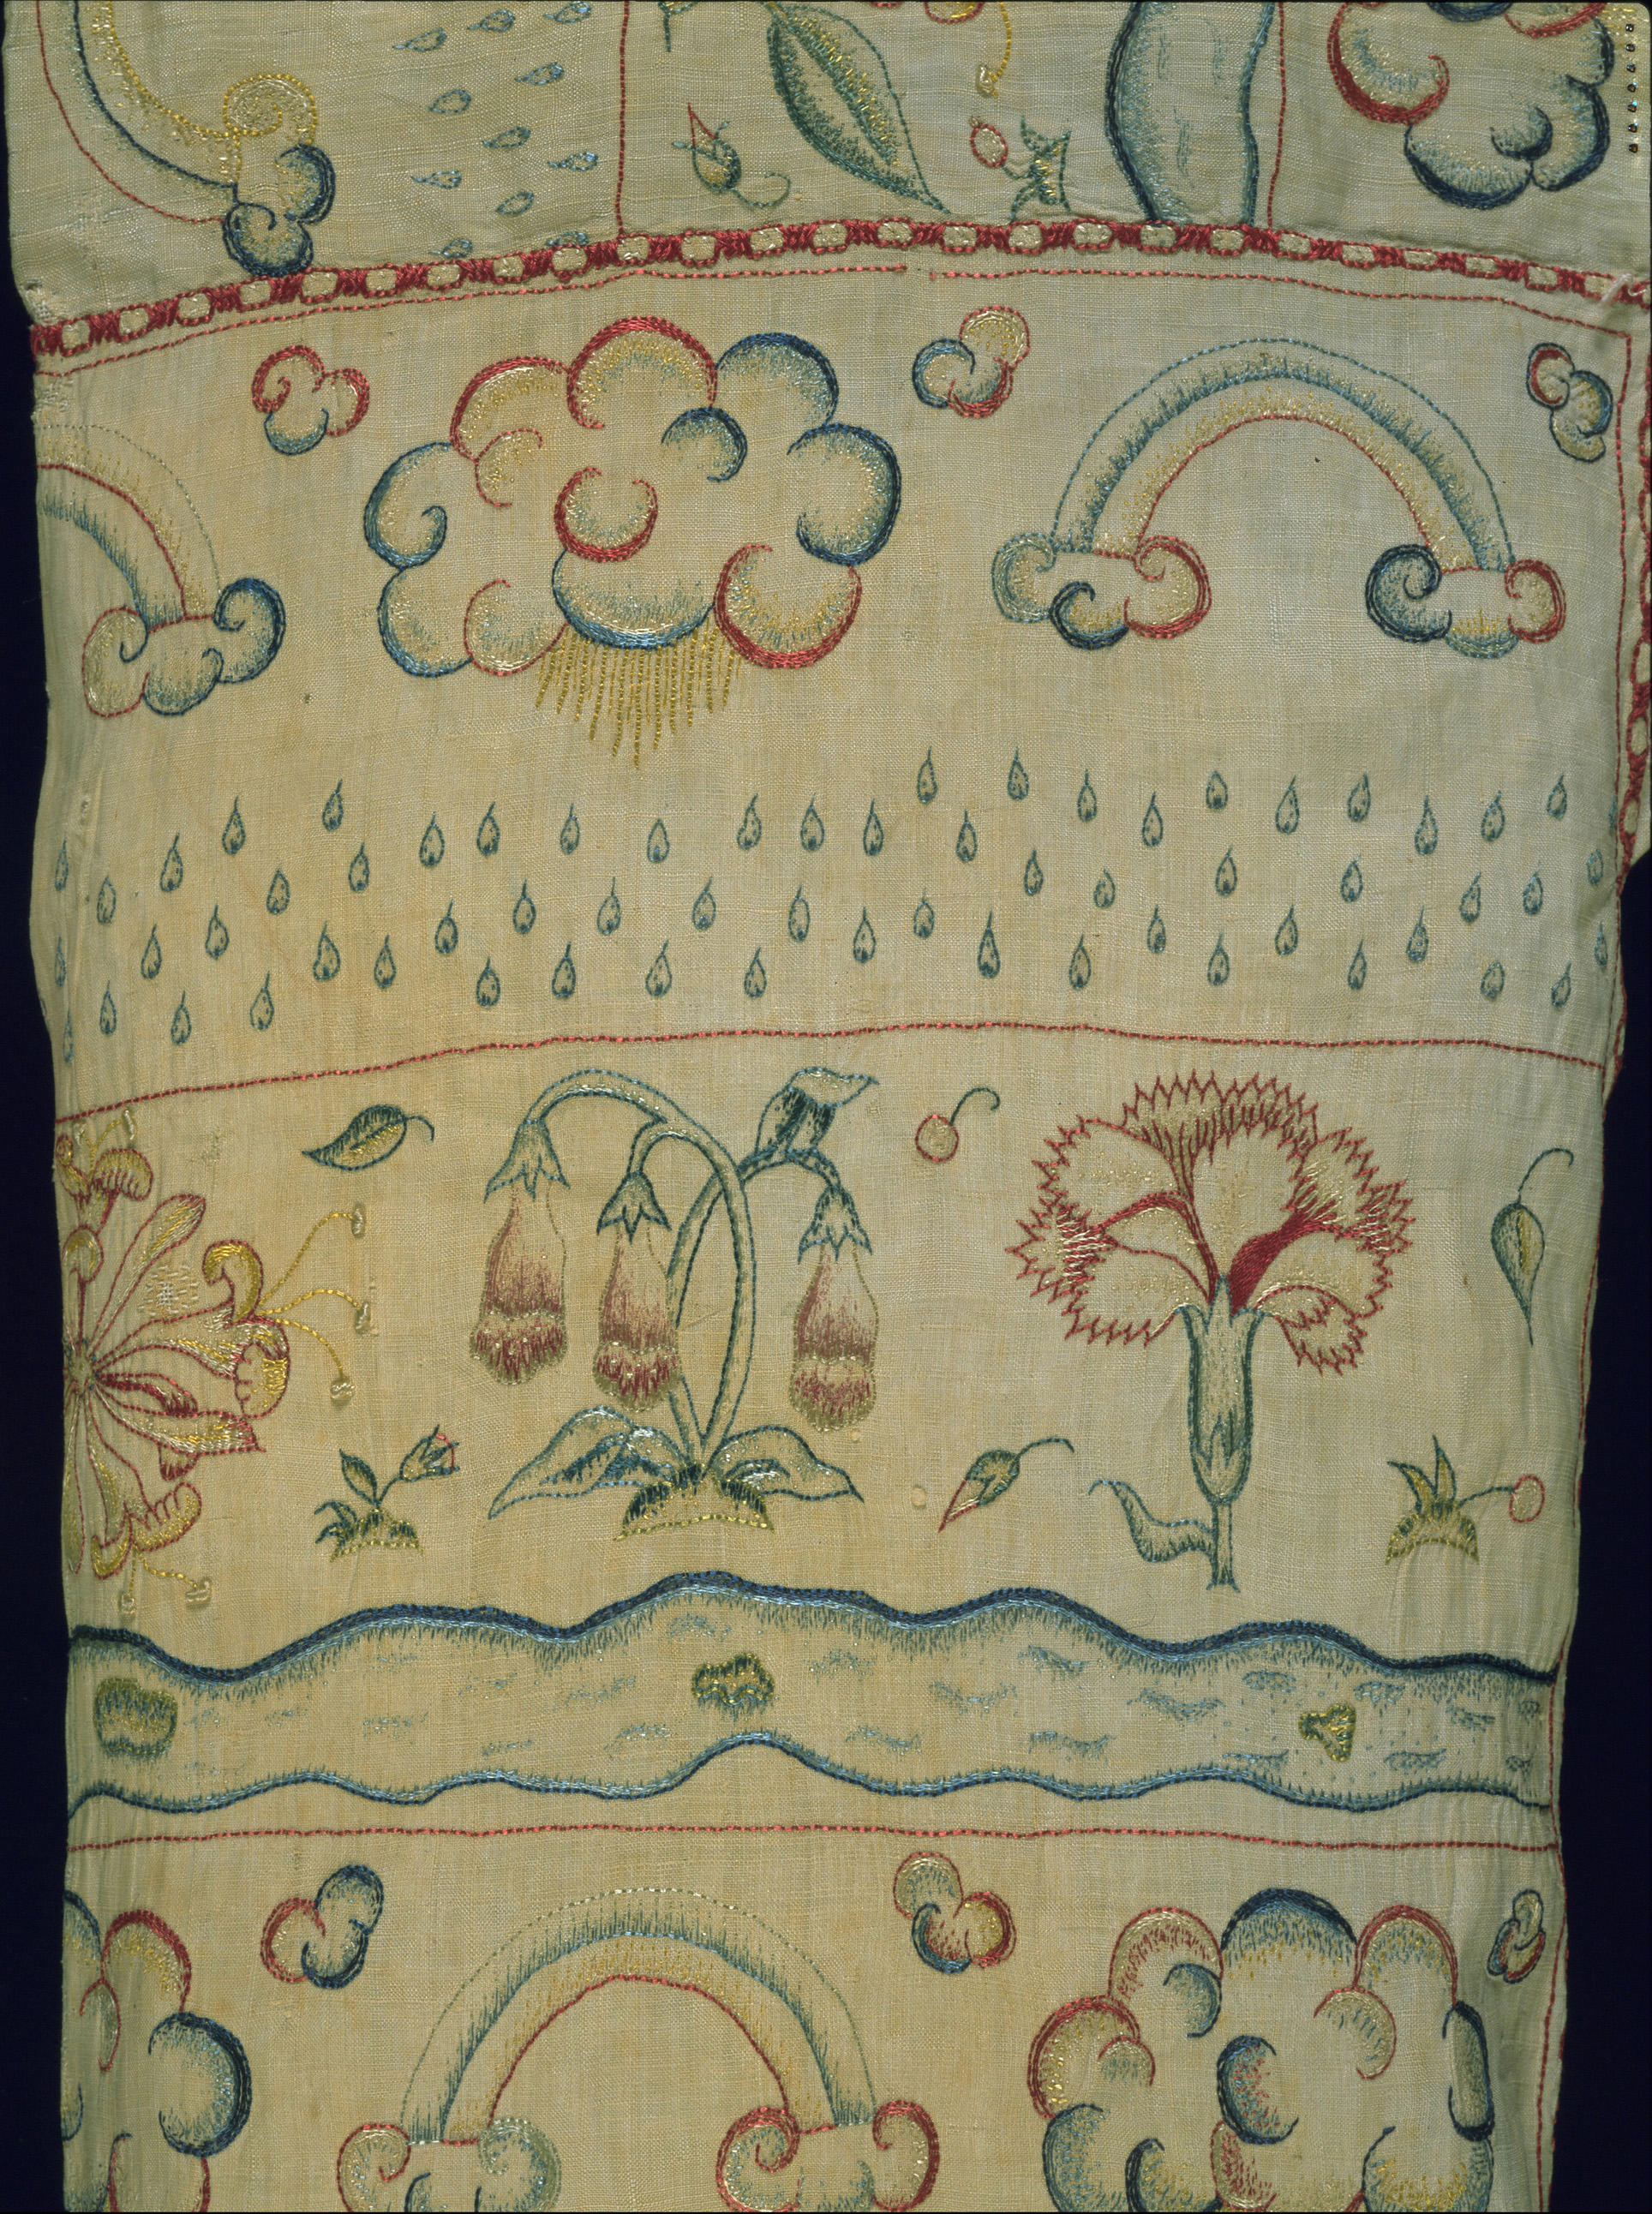 Title: Woman’s smock Place:England Date: c. 1600 Medium & technique: Linen, hand-embroidered with coloured silks Dimensions: 40 x 1390 mm (bodice and sleeves) Themes: Bodies - Inside & Outside Collection: (c) the Whitworth, The University of Manchester The embroideries shown in this detail – featuring carnations, foxgloves and honeysuckle – decorate an early-seventeenth-century woman’s smock, or shift. Originally full length, only the patterned bodice and sleeves have survived and it is likely that the owner cut off the plain, lower half of the garment after the linen became marked or damaged. One of the functions of an undergarment like this smock was to draw sweat and impurities away from the body and various contemporary authors mused on the consequences of wearing dirty or clean linens. From sweet-smelling flowers to a shower of raindrops and clouds anticipating a storm, the embroideries on the smock remind us of the influence of the environment on the body and the role of this garment in shielding the wearer from the hazards of bad air and excess heat or cold. Elizabeth Currie, Victoria and Albert Museum/ RCA